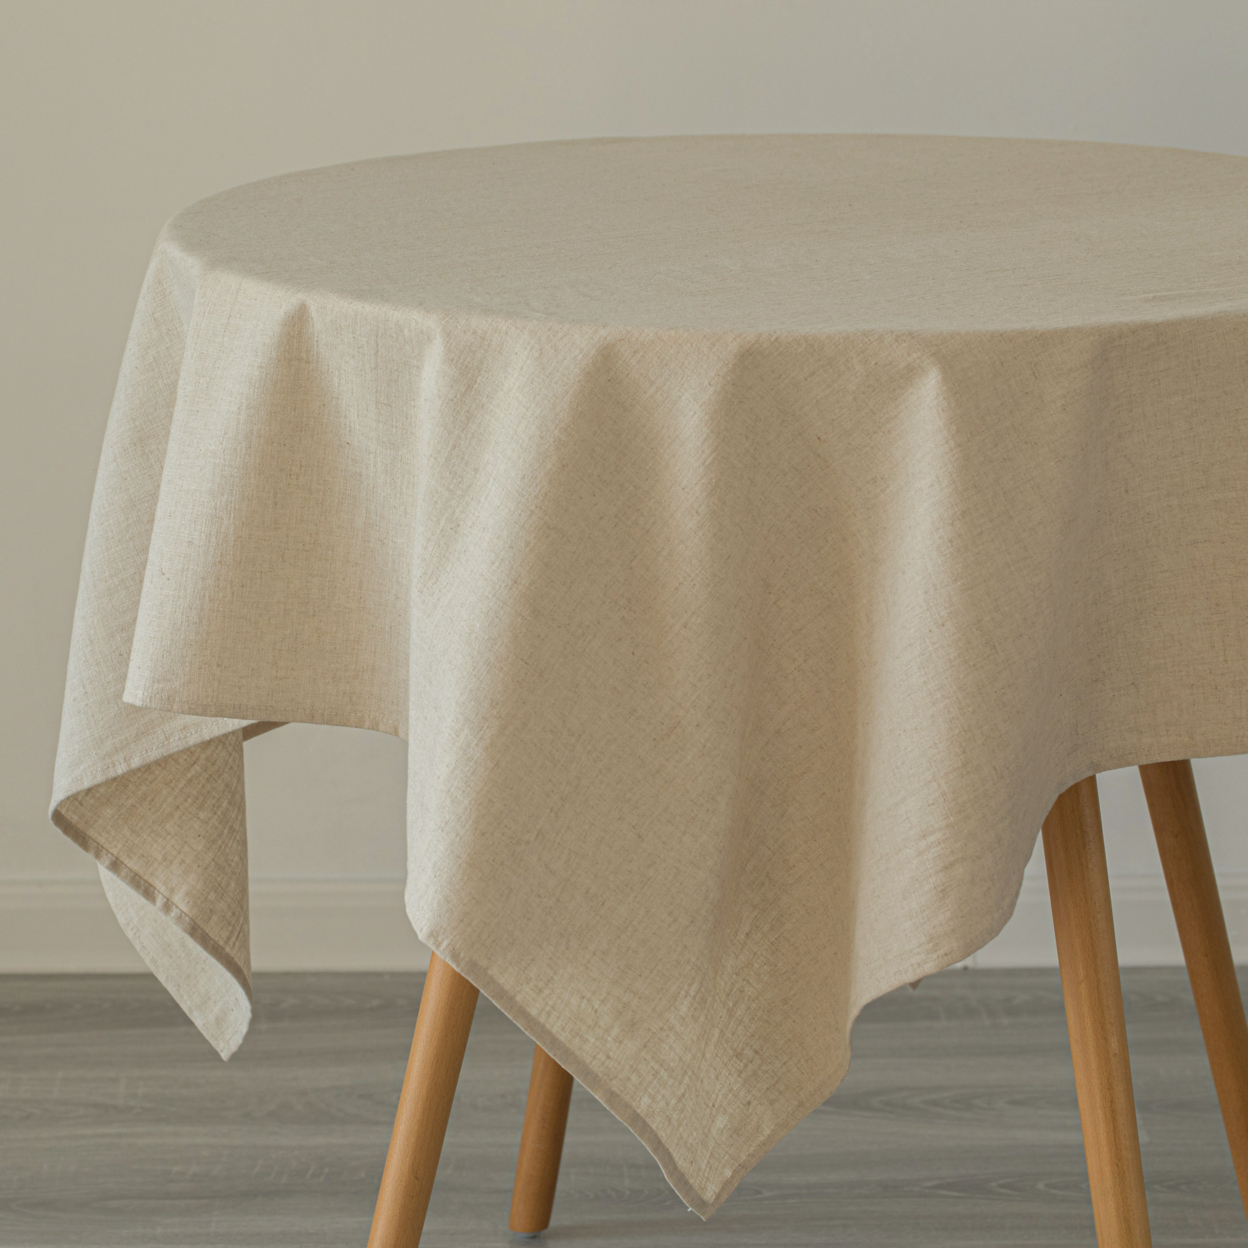 Deerlux 100 Percent Pure Linen Washable Tablecloth Solid Color - 52 X 70 In. Natural